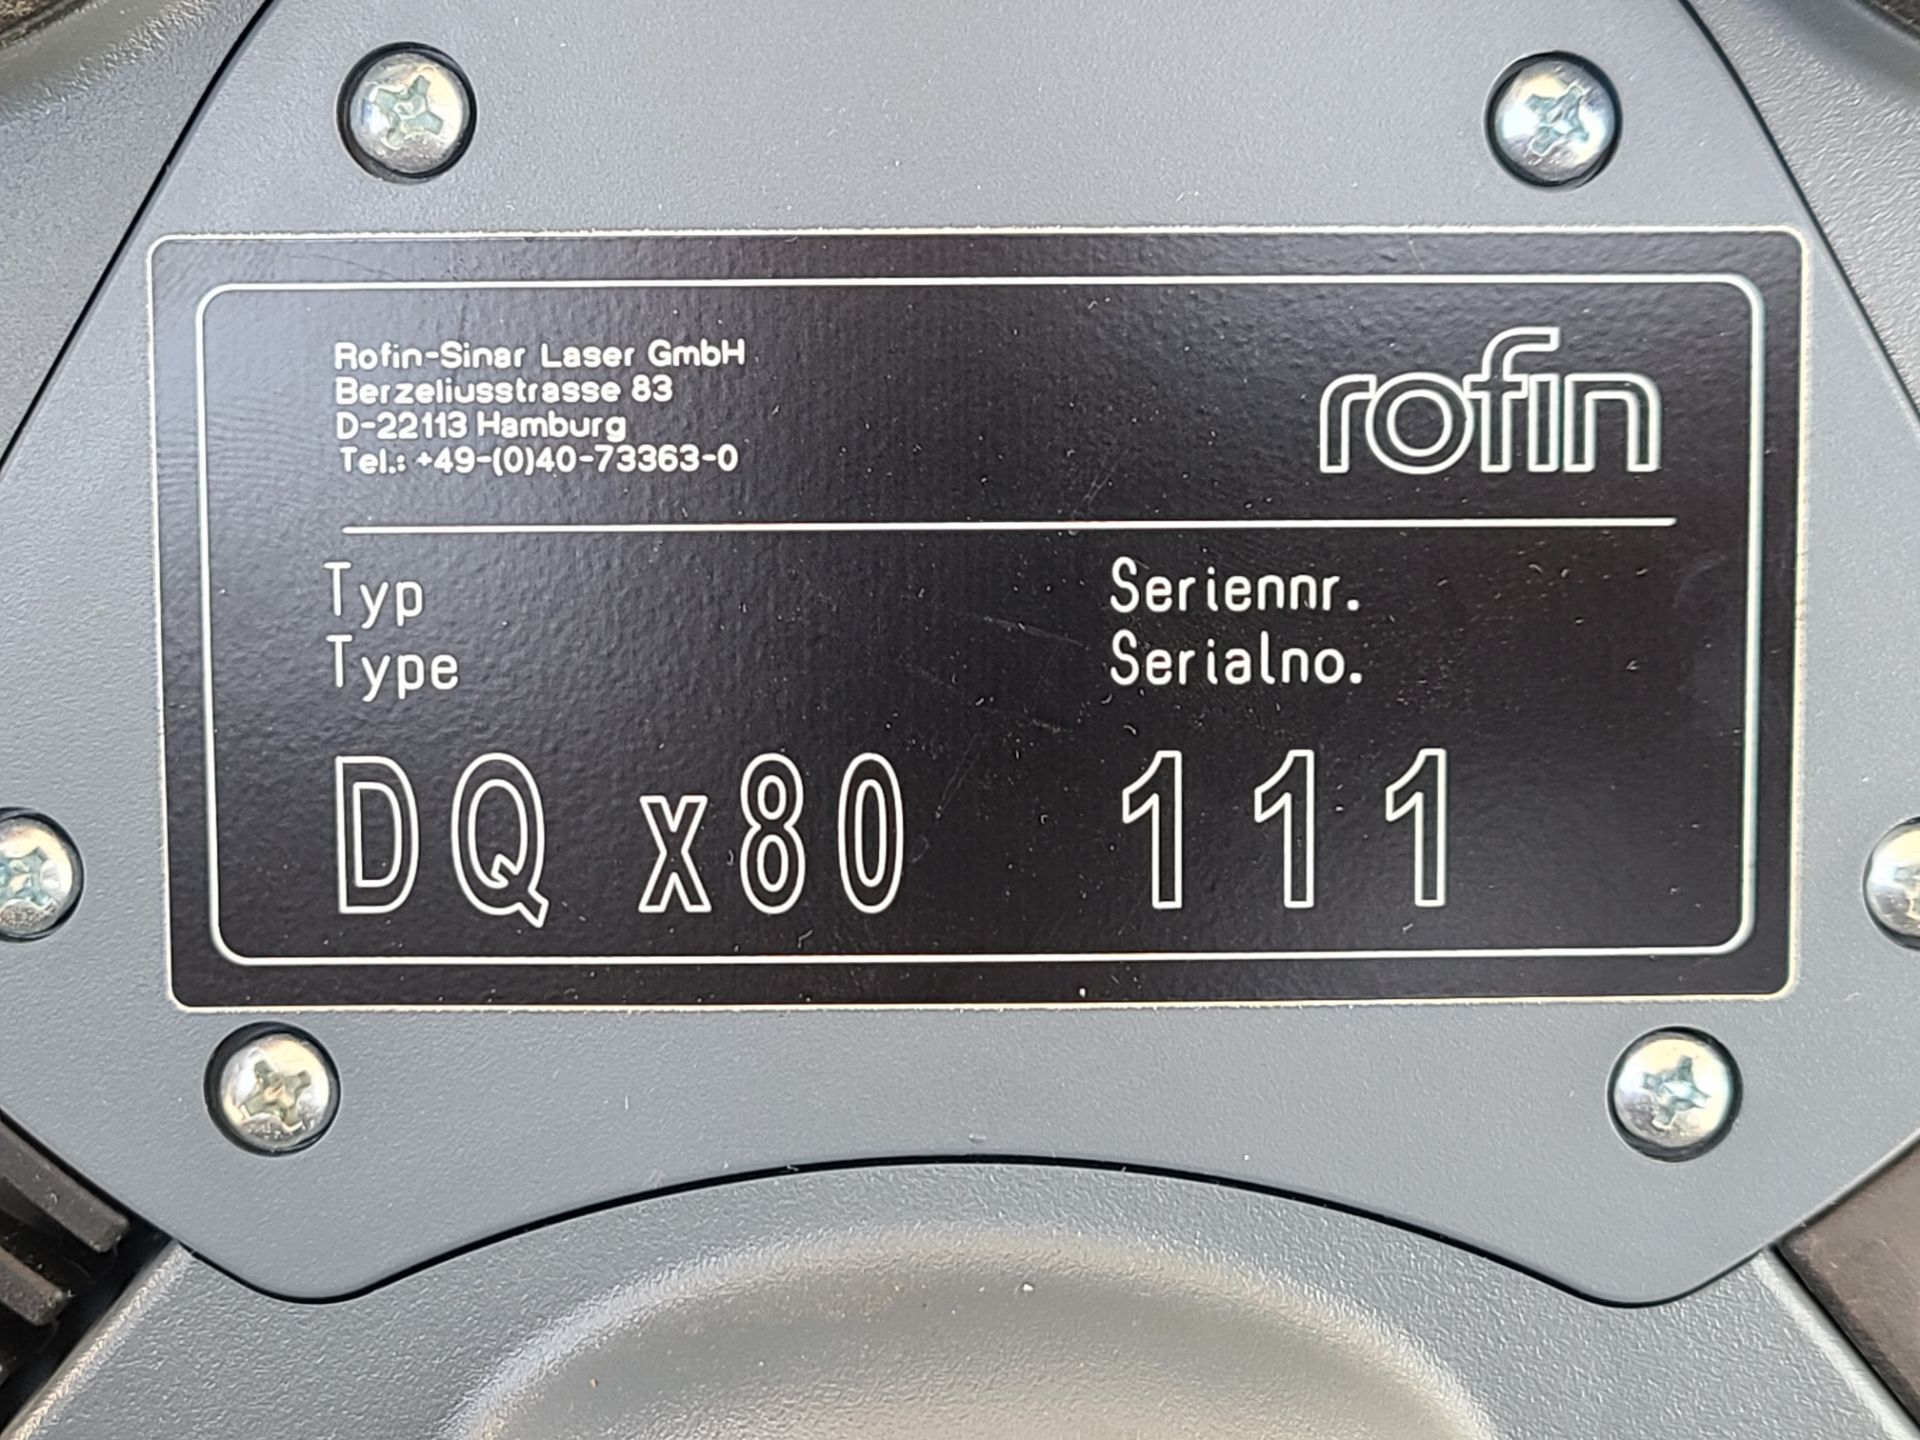 ROFIN SINAR DQ X80 DIODE PUMPED SOLID STATE LASER EDGE DELETION YAG SYSTEM - Image 15 of 84